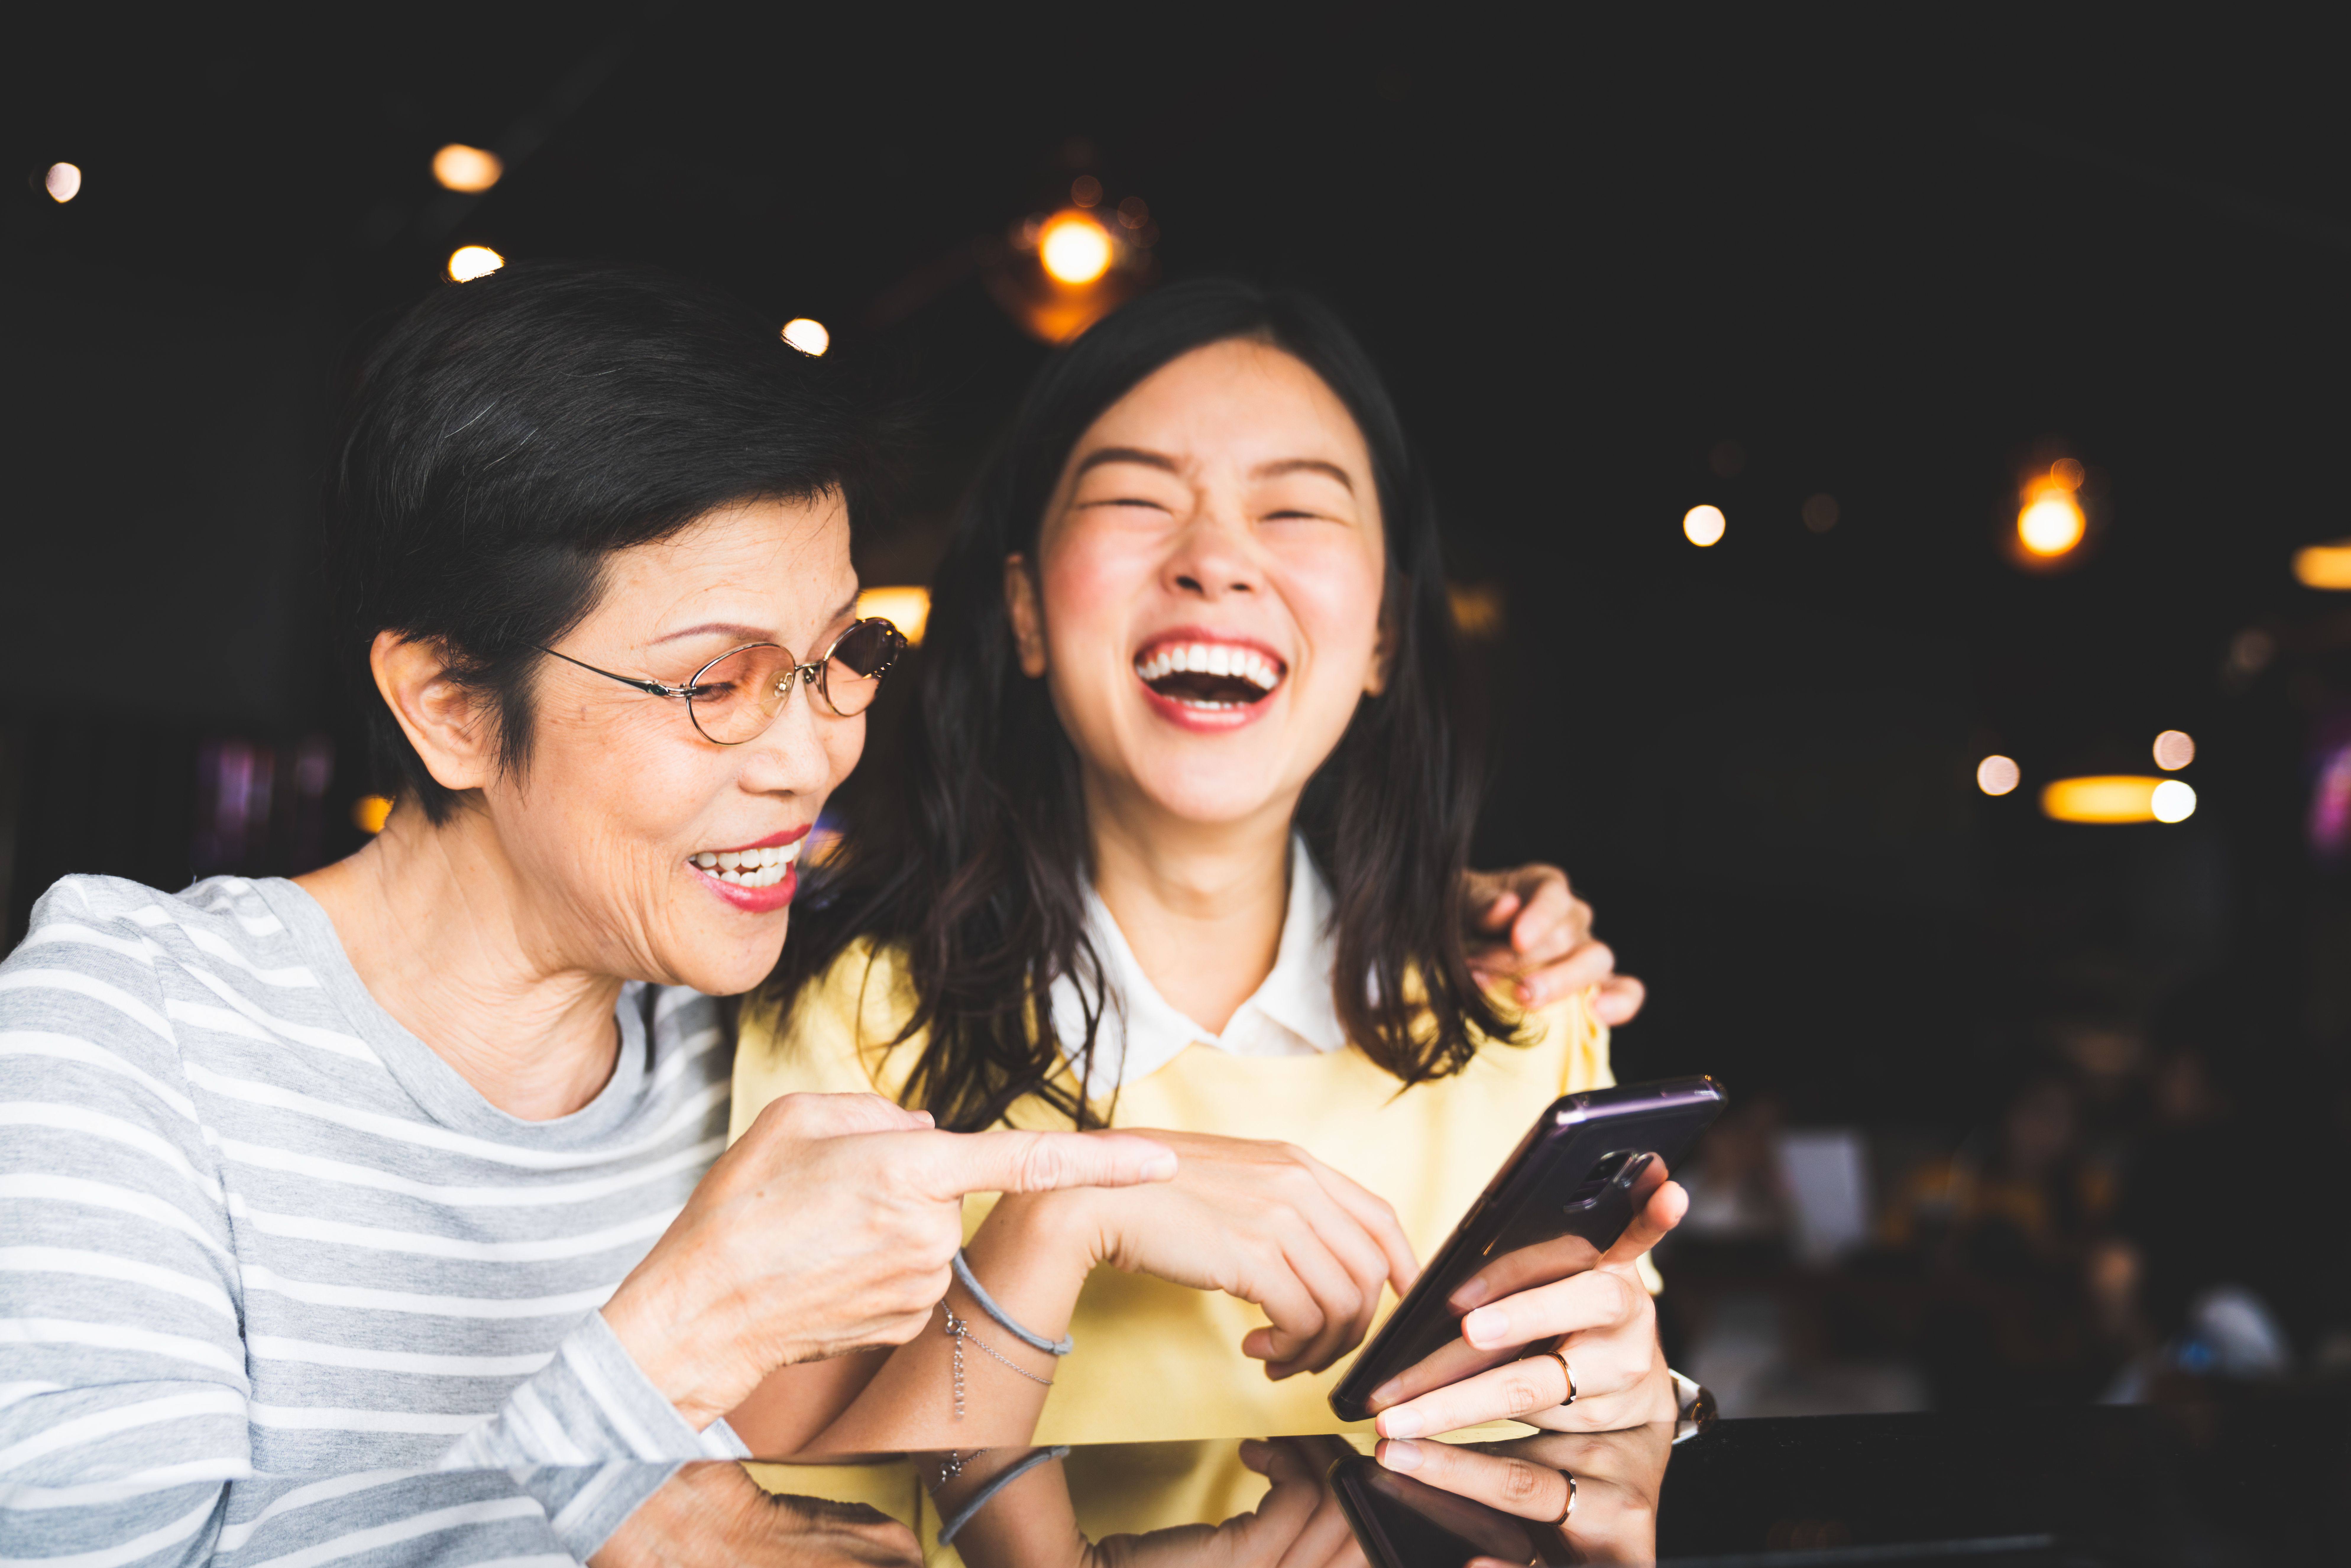 Elderly woman and younger woman looking at smartphone and laughing